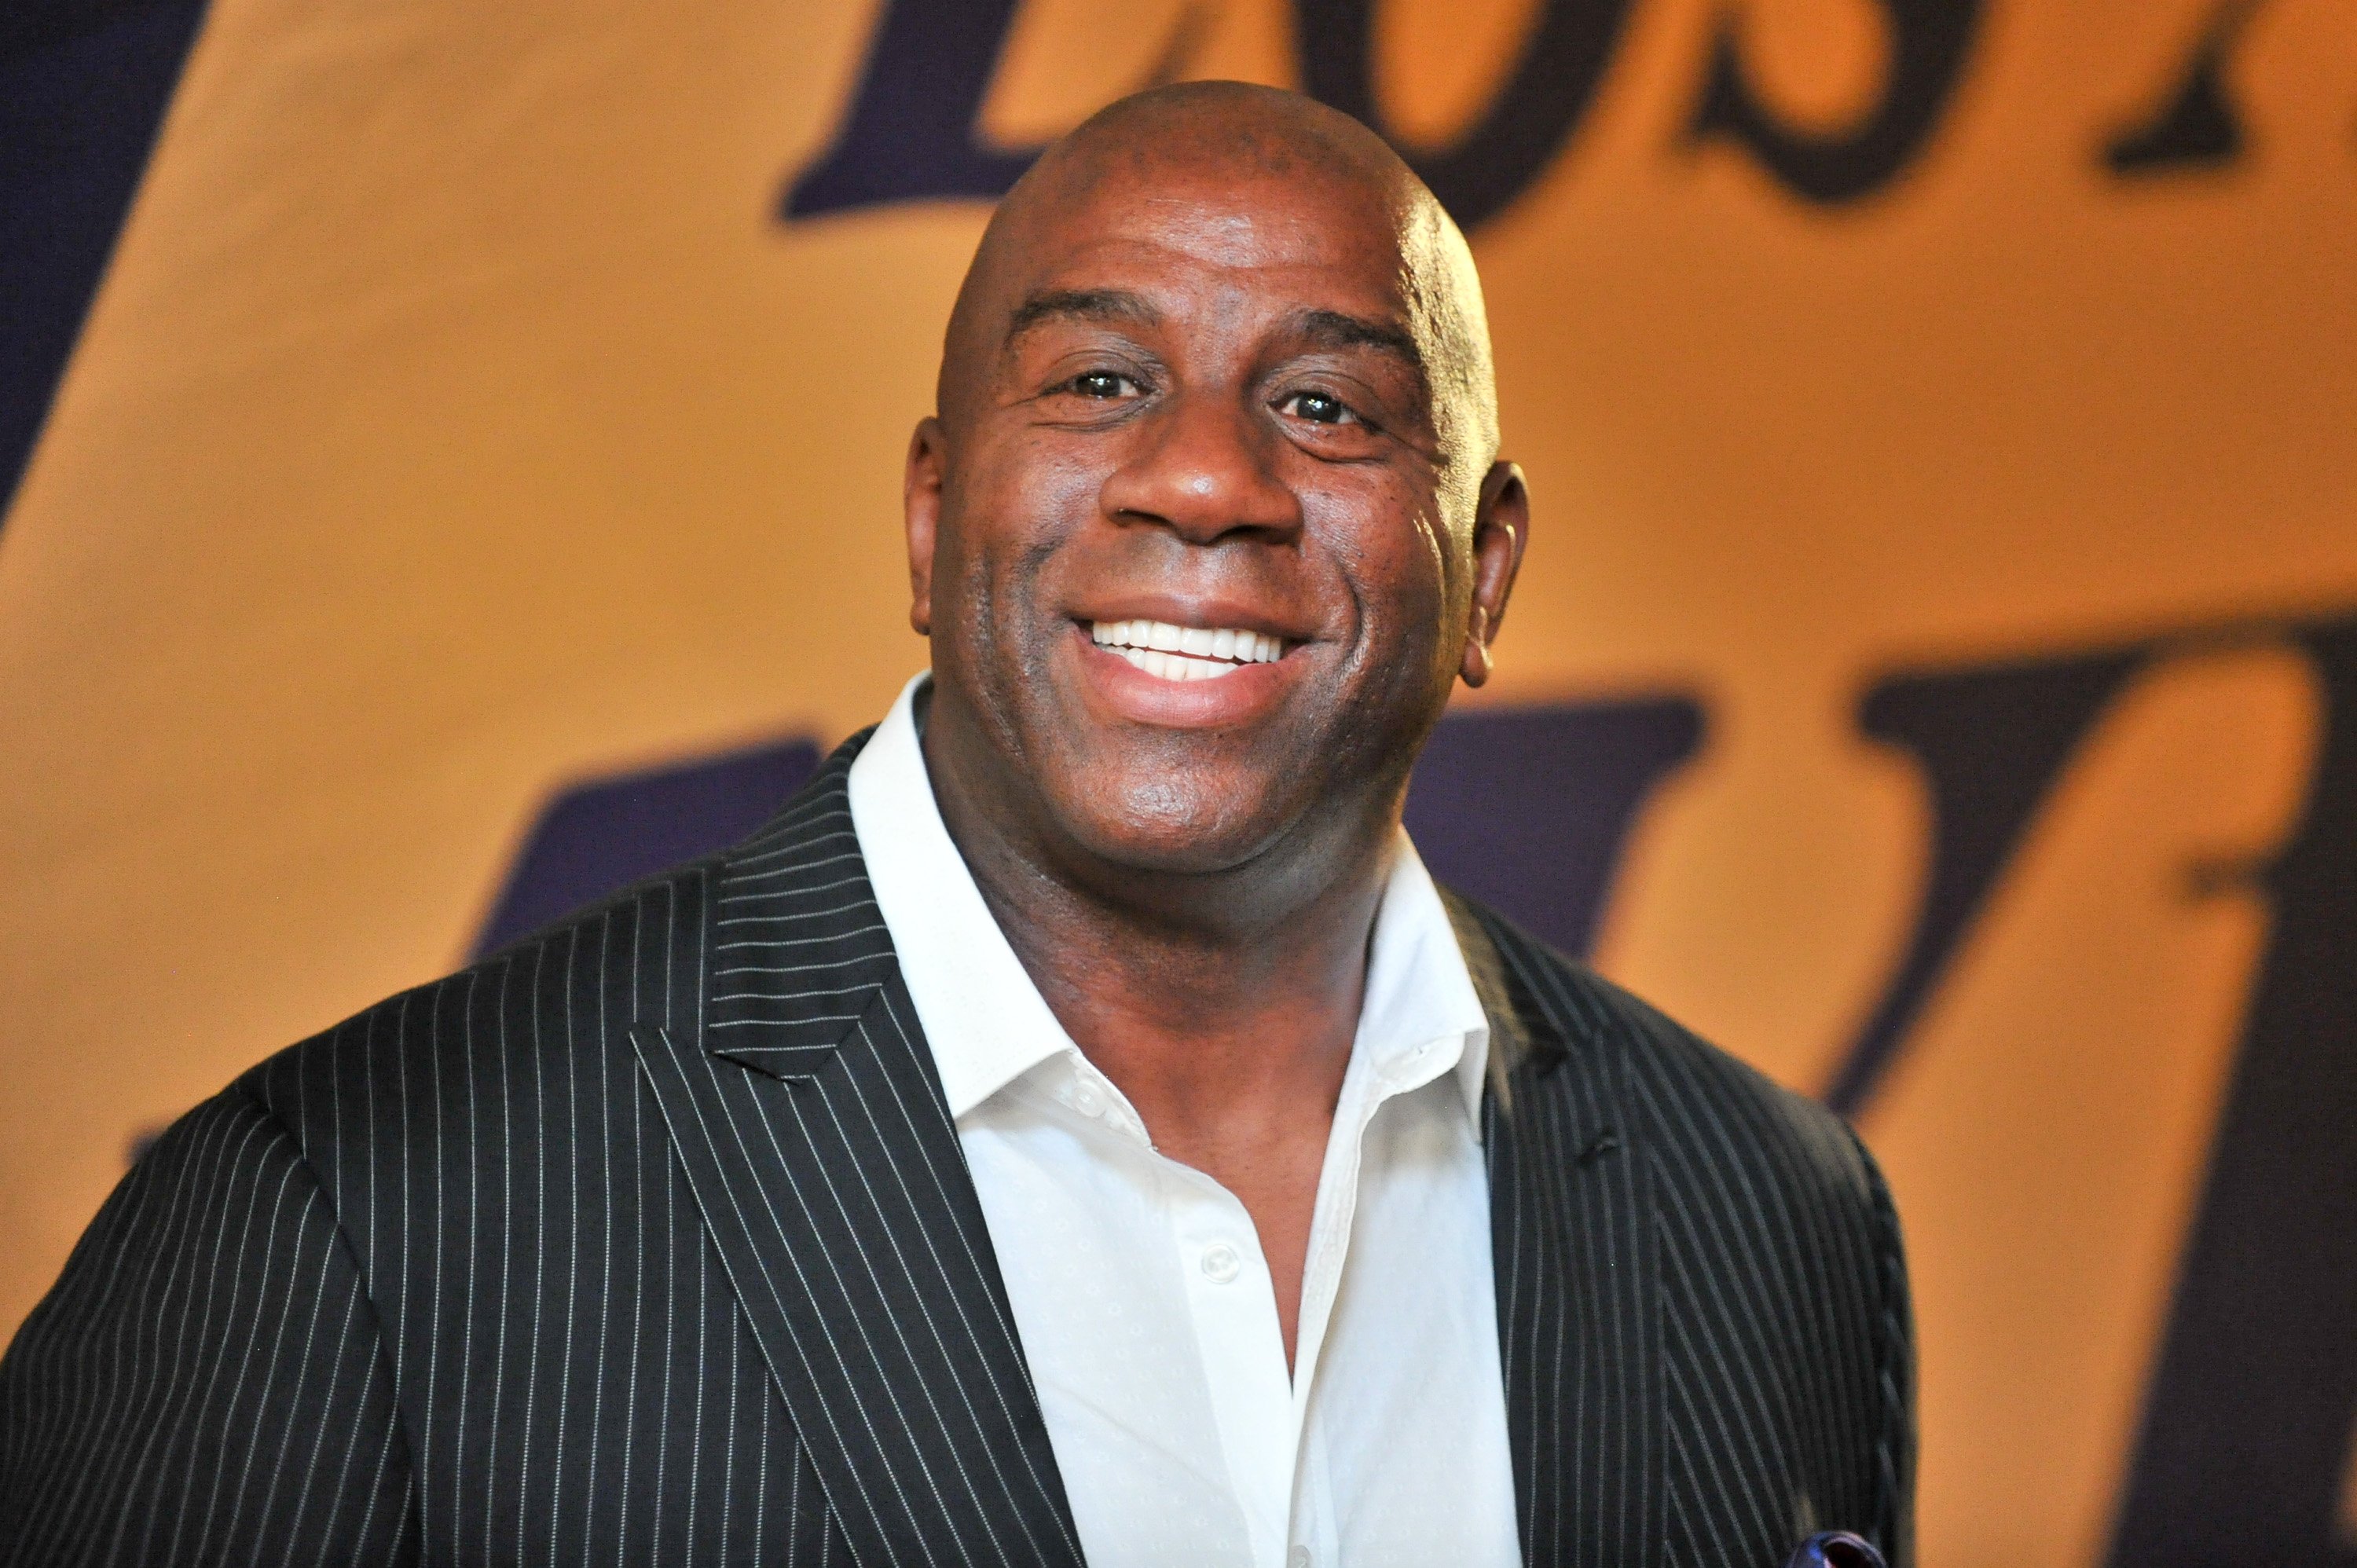 Magic Johnson pictured at the Staples Center on October 19, 2017 in Los Angeles, California. | Source: Getty Images